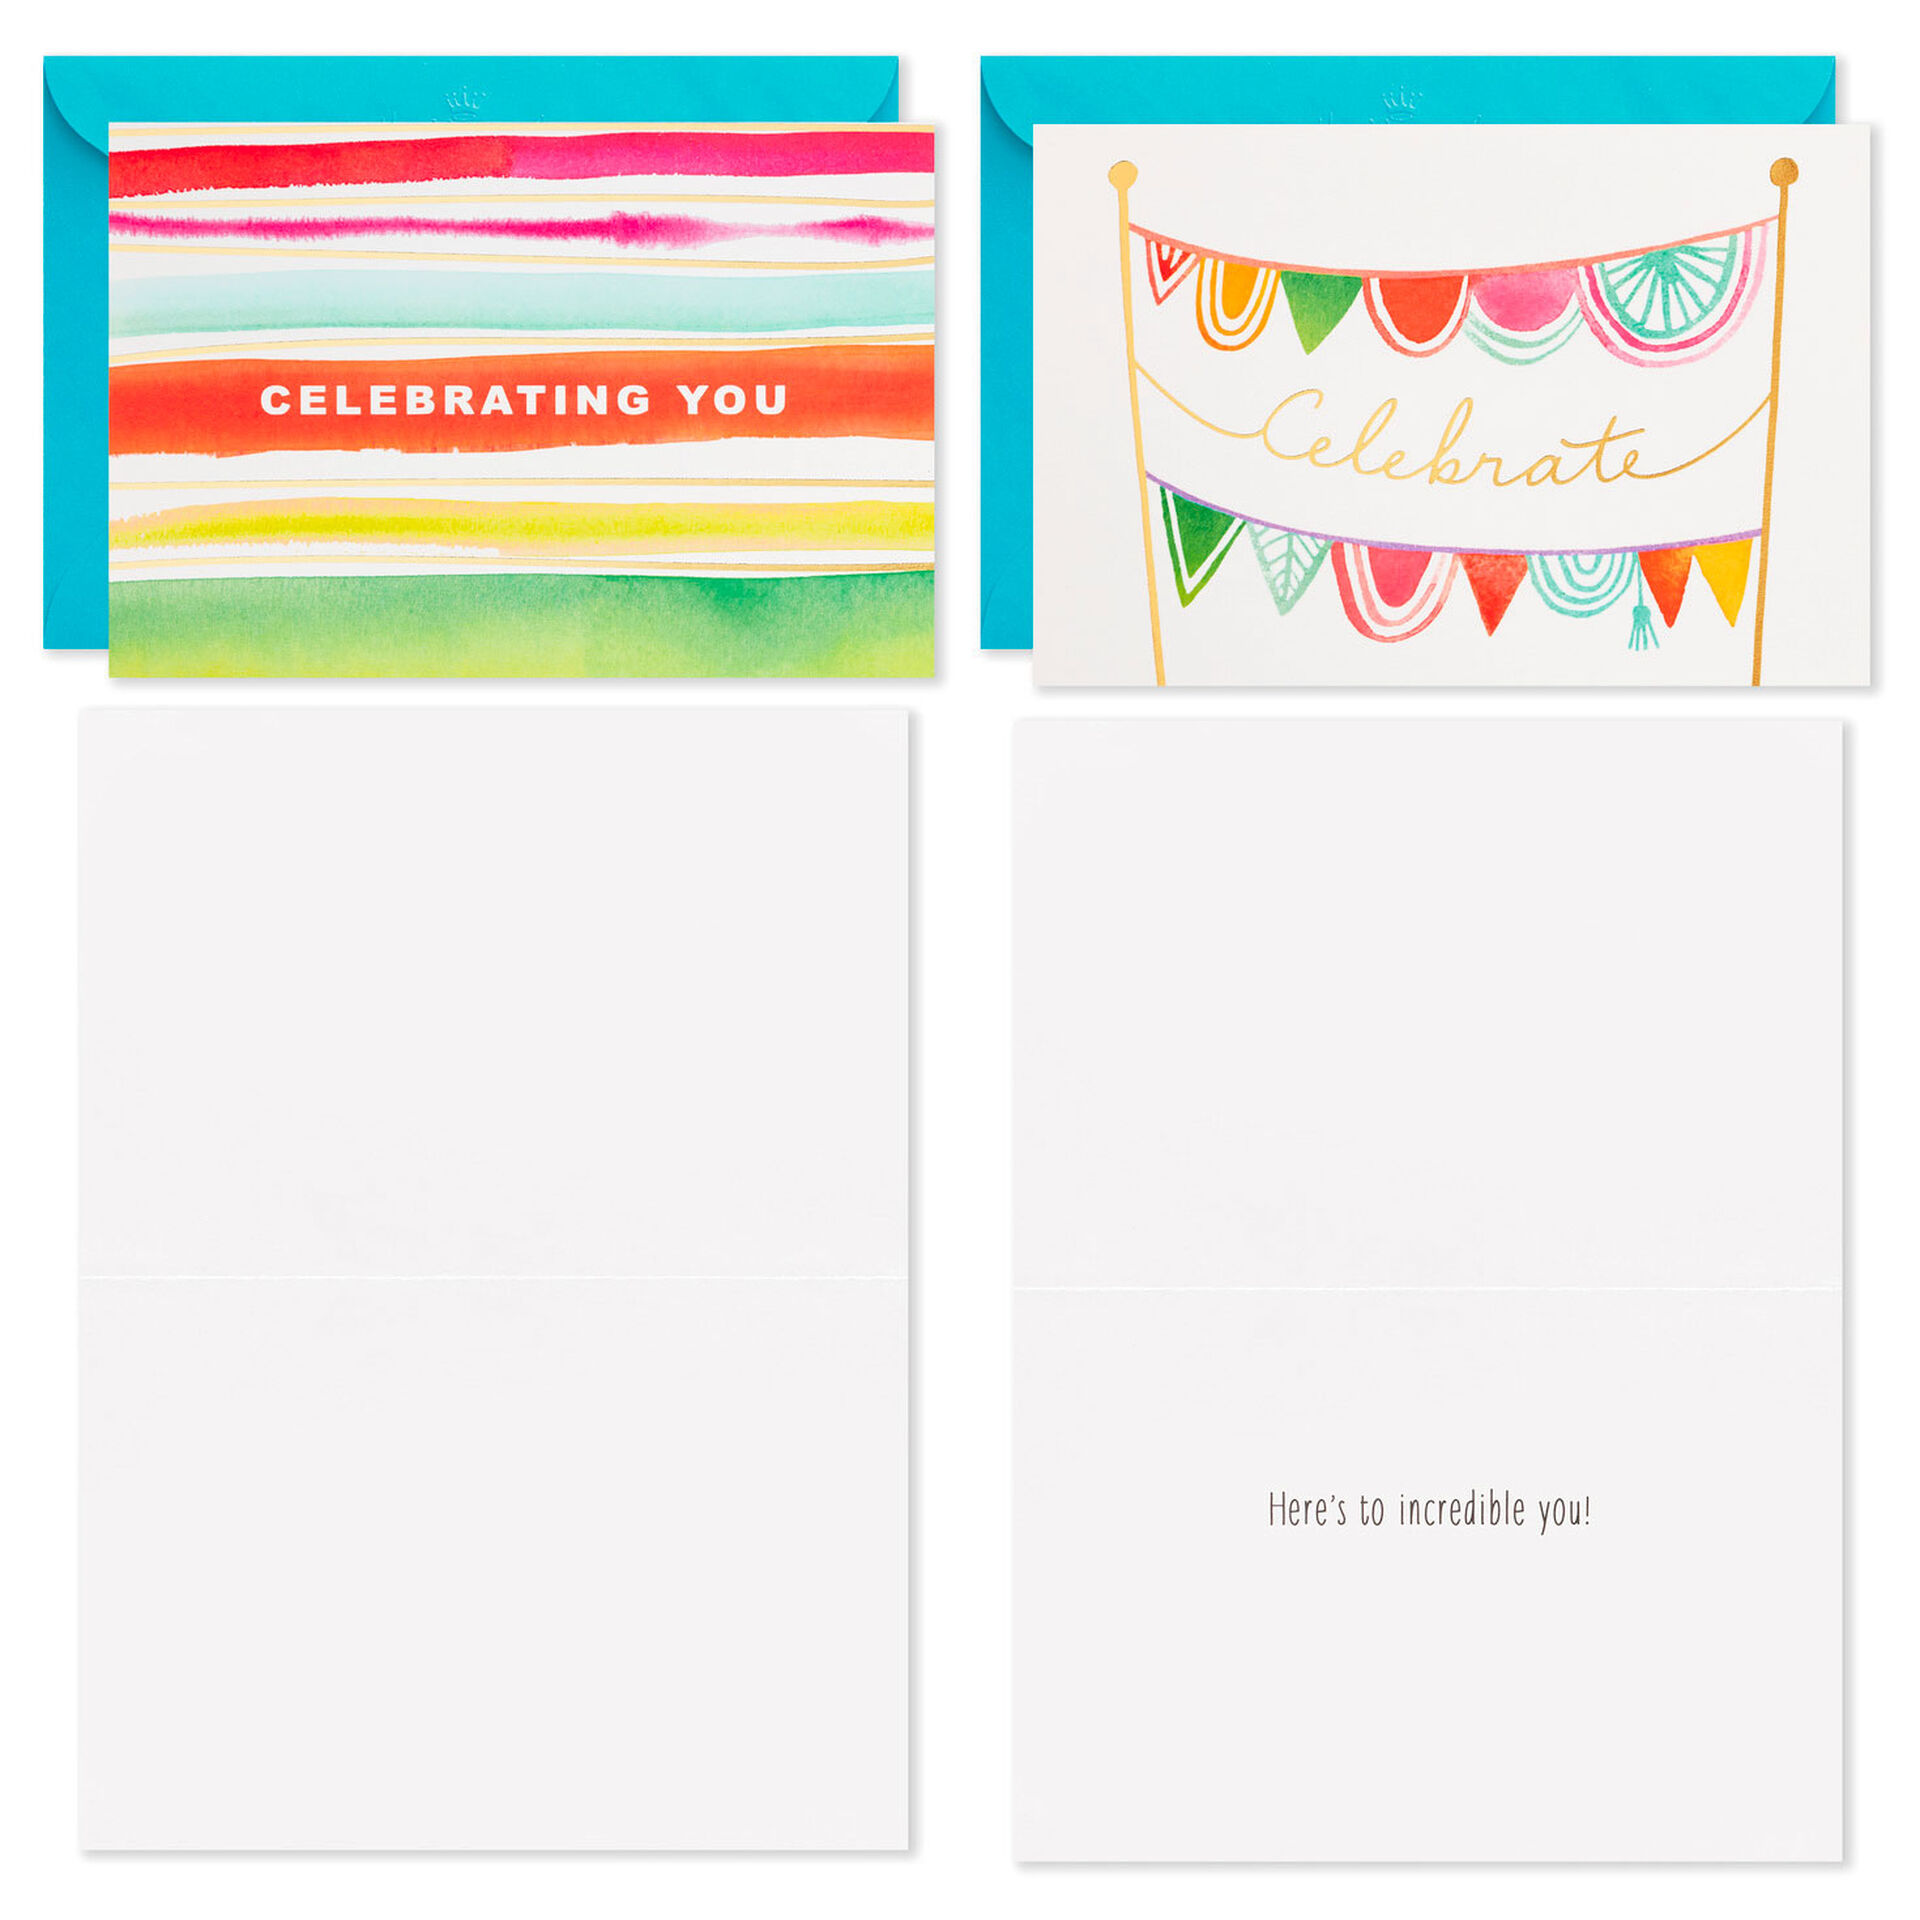 Assorted-Bright-Watercolor-Boxed-Birthday-Cards_5STZ1107_03